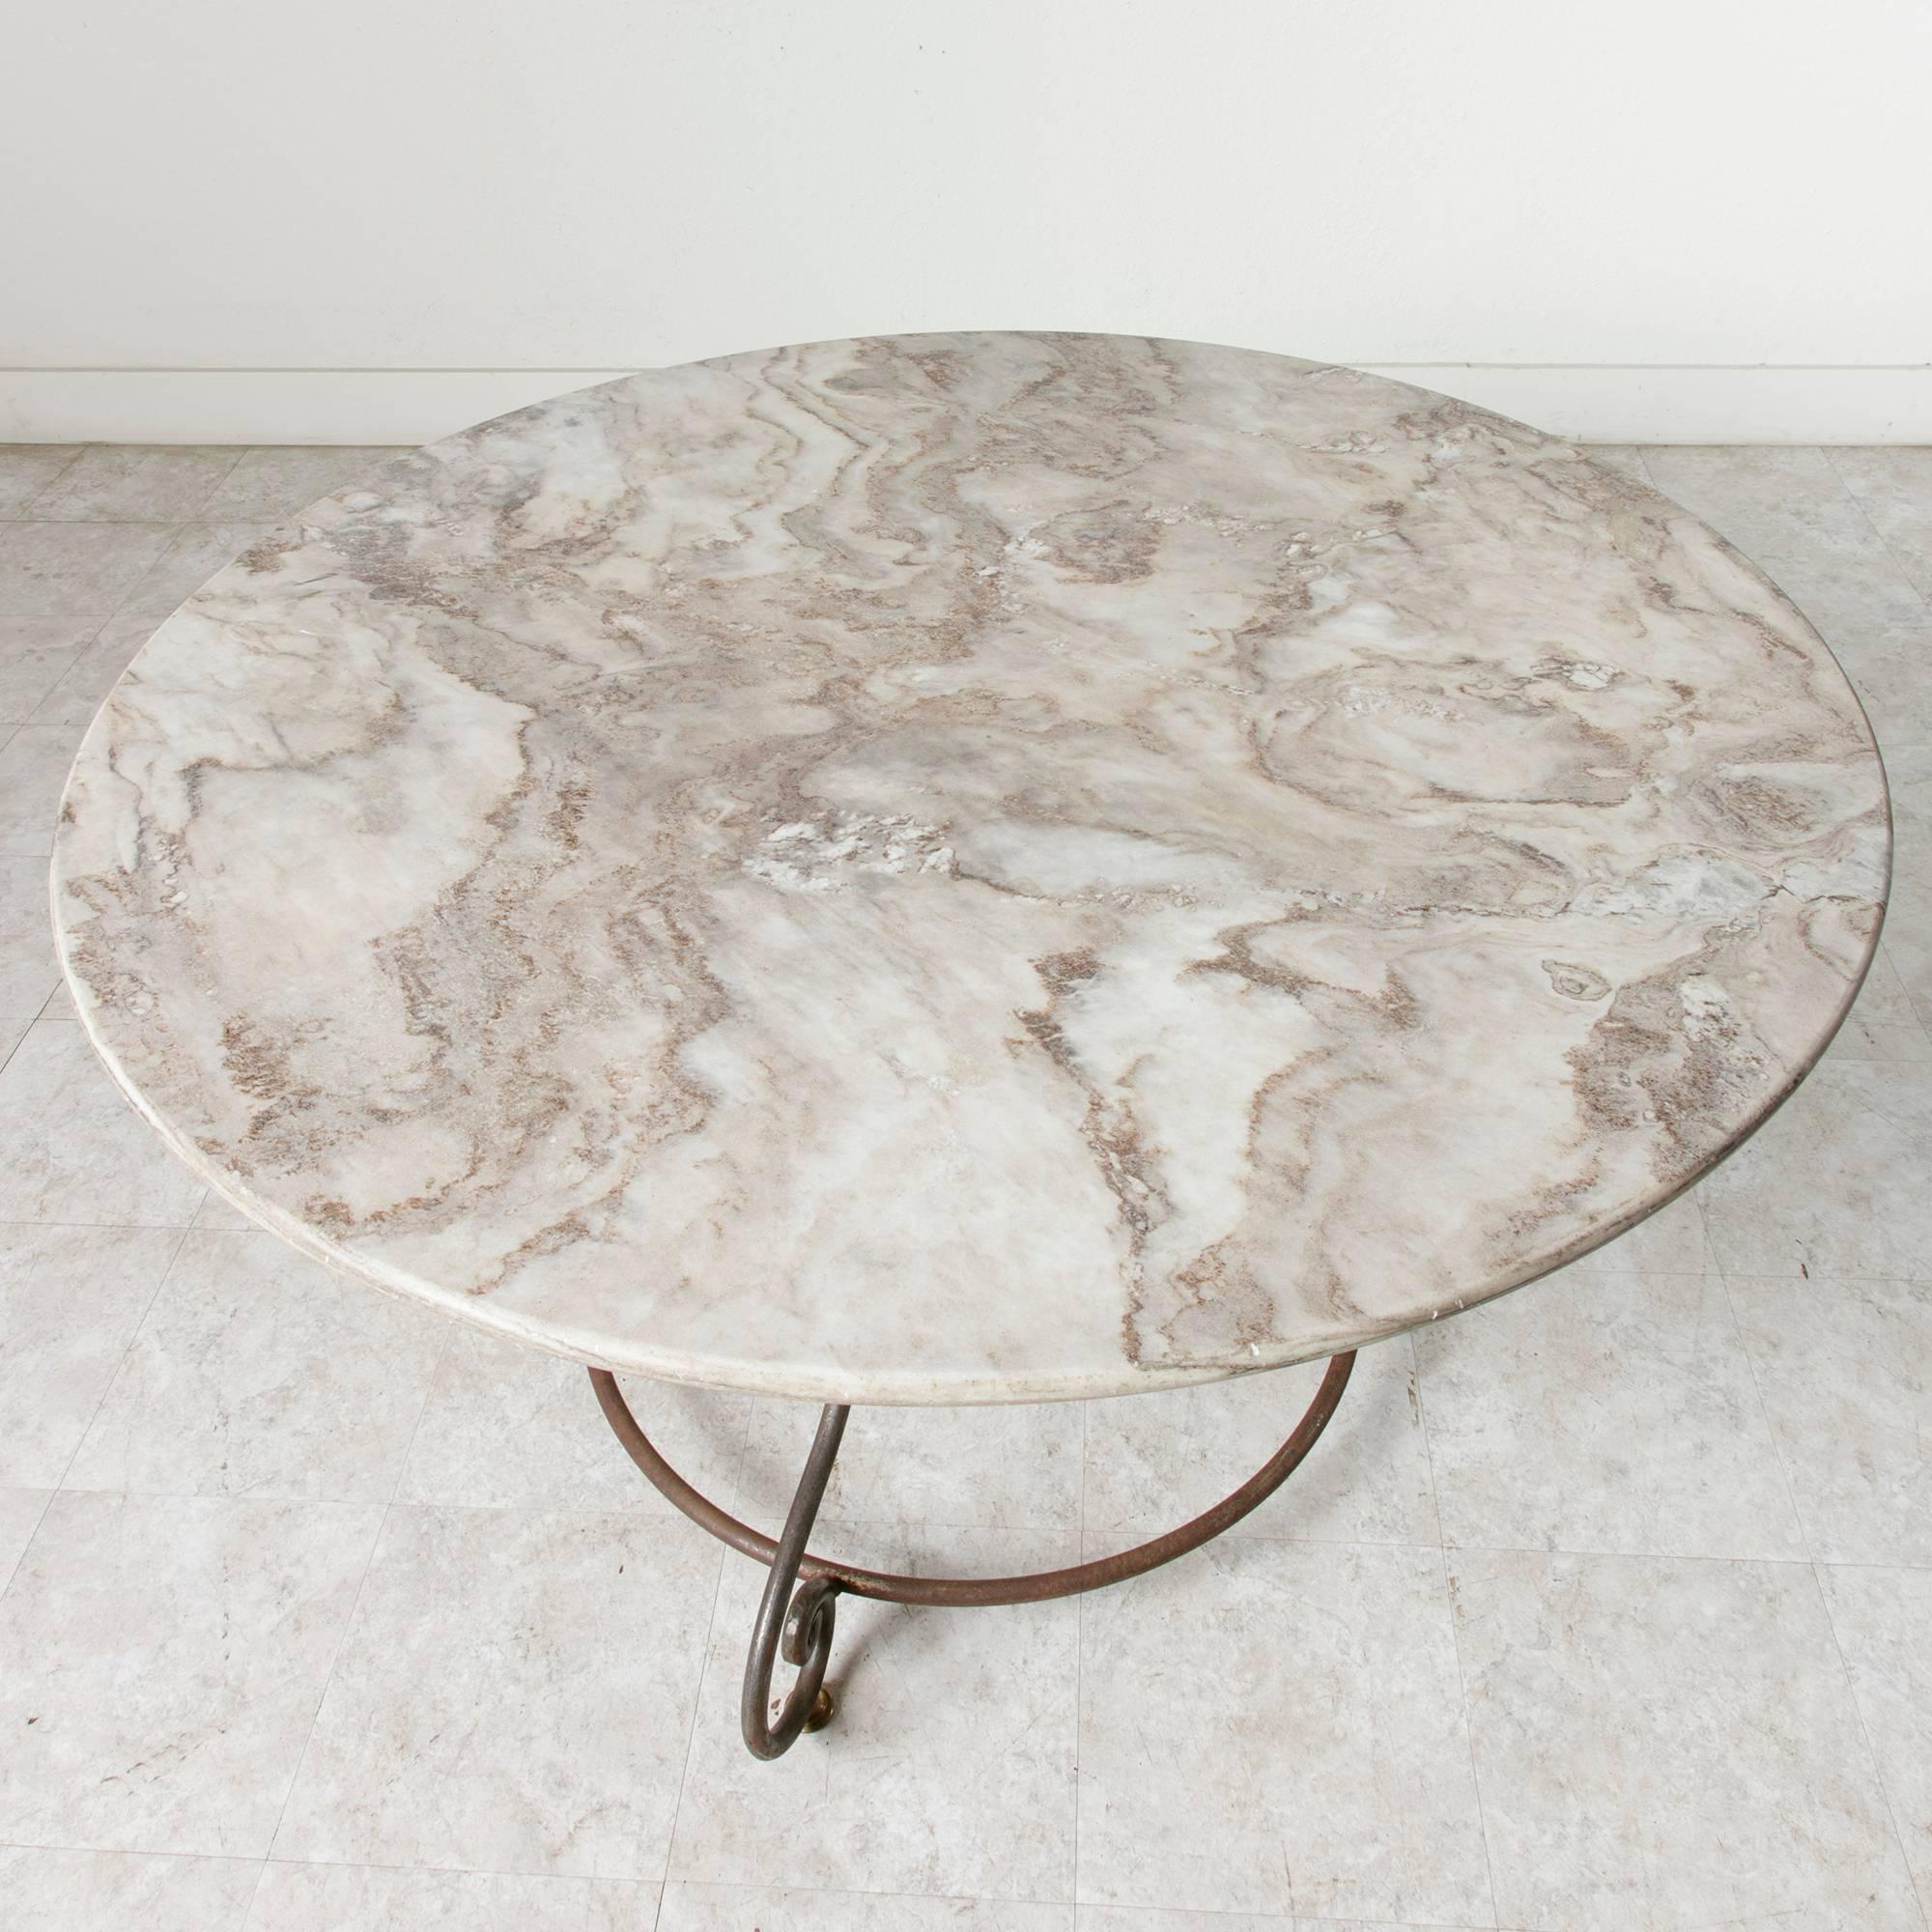 This large French round garden table features an exceptional marble-top resting on an elegant, iron base. A mid-twentieth century table of classical form with a 51-inch diameter, it easily seats six. Ideal for plein air dining in the garden or as a